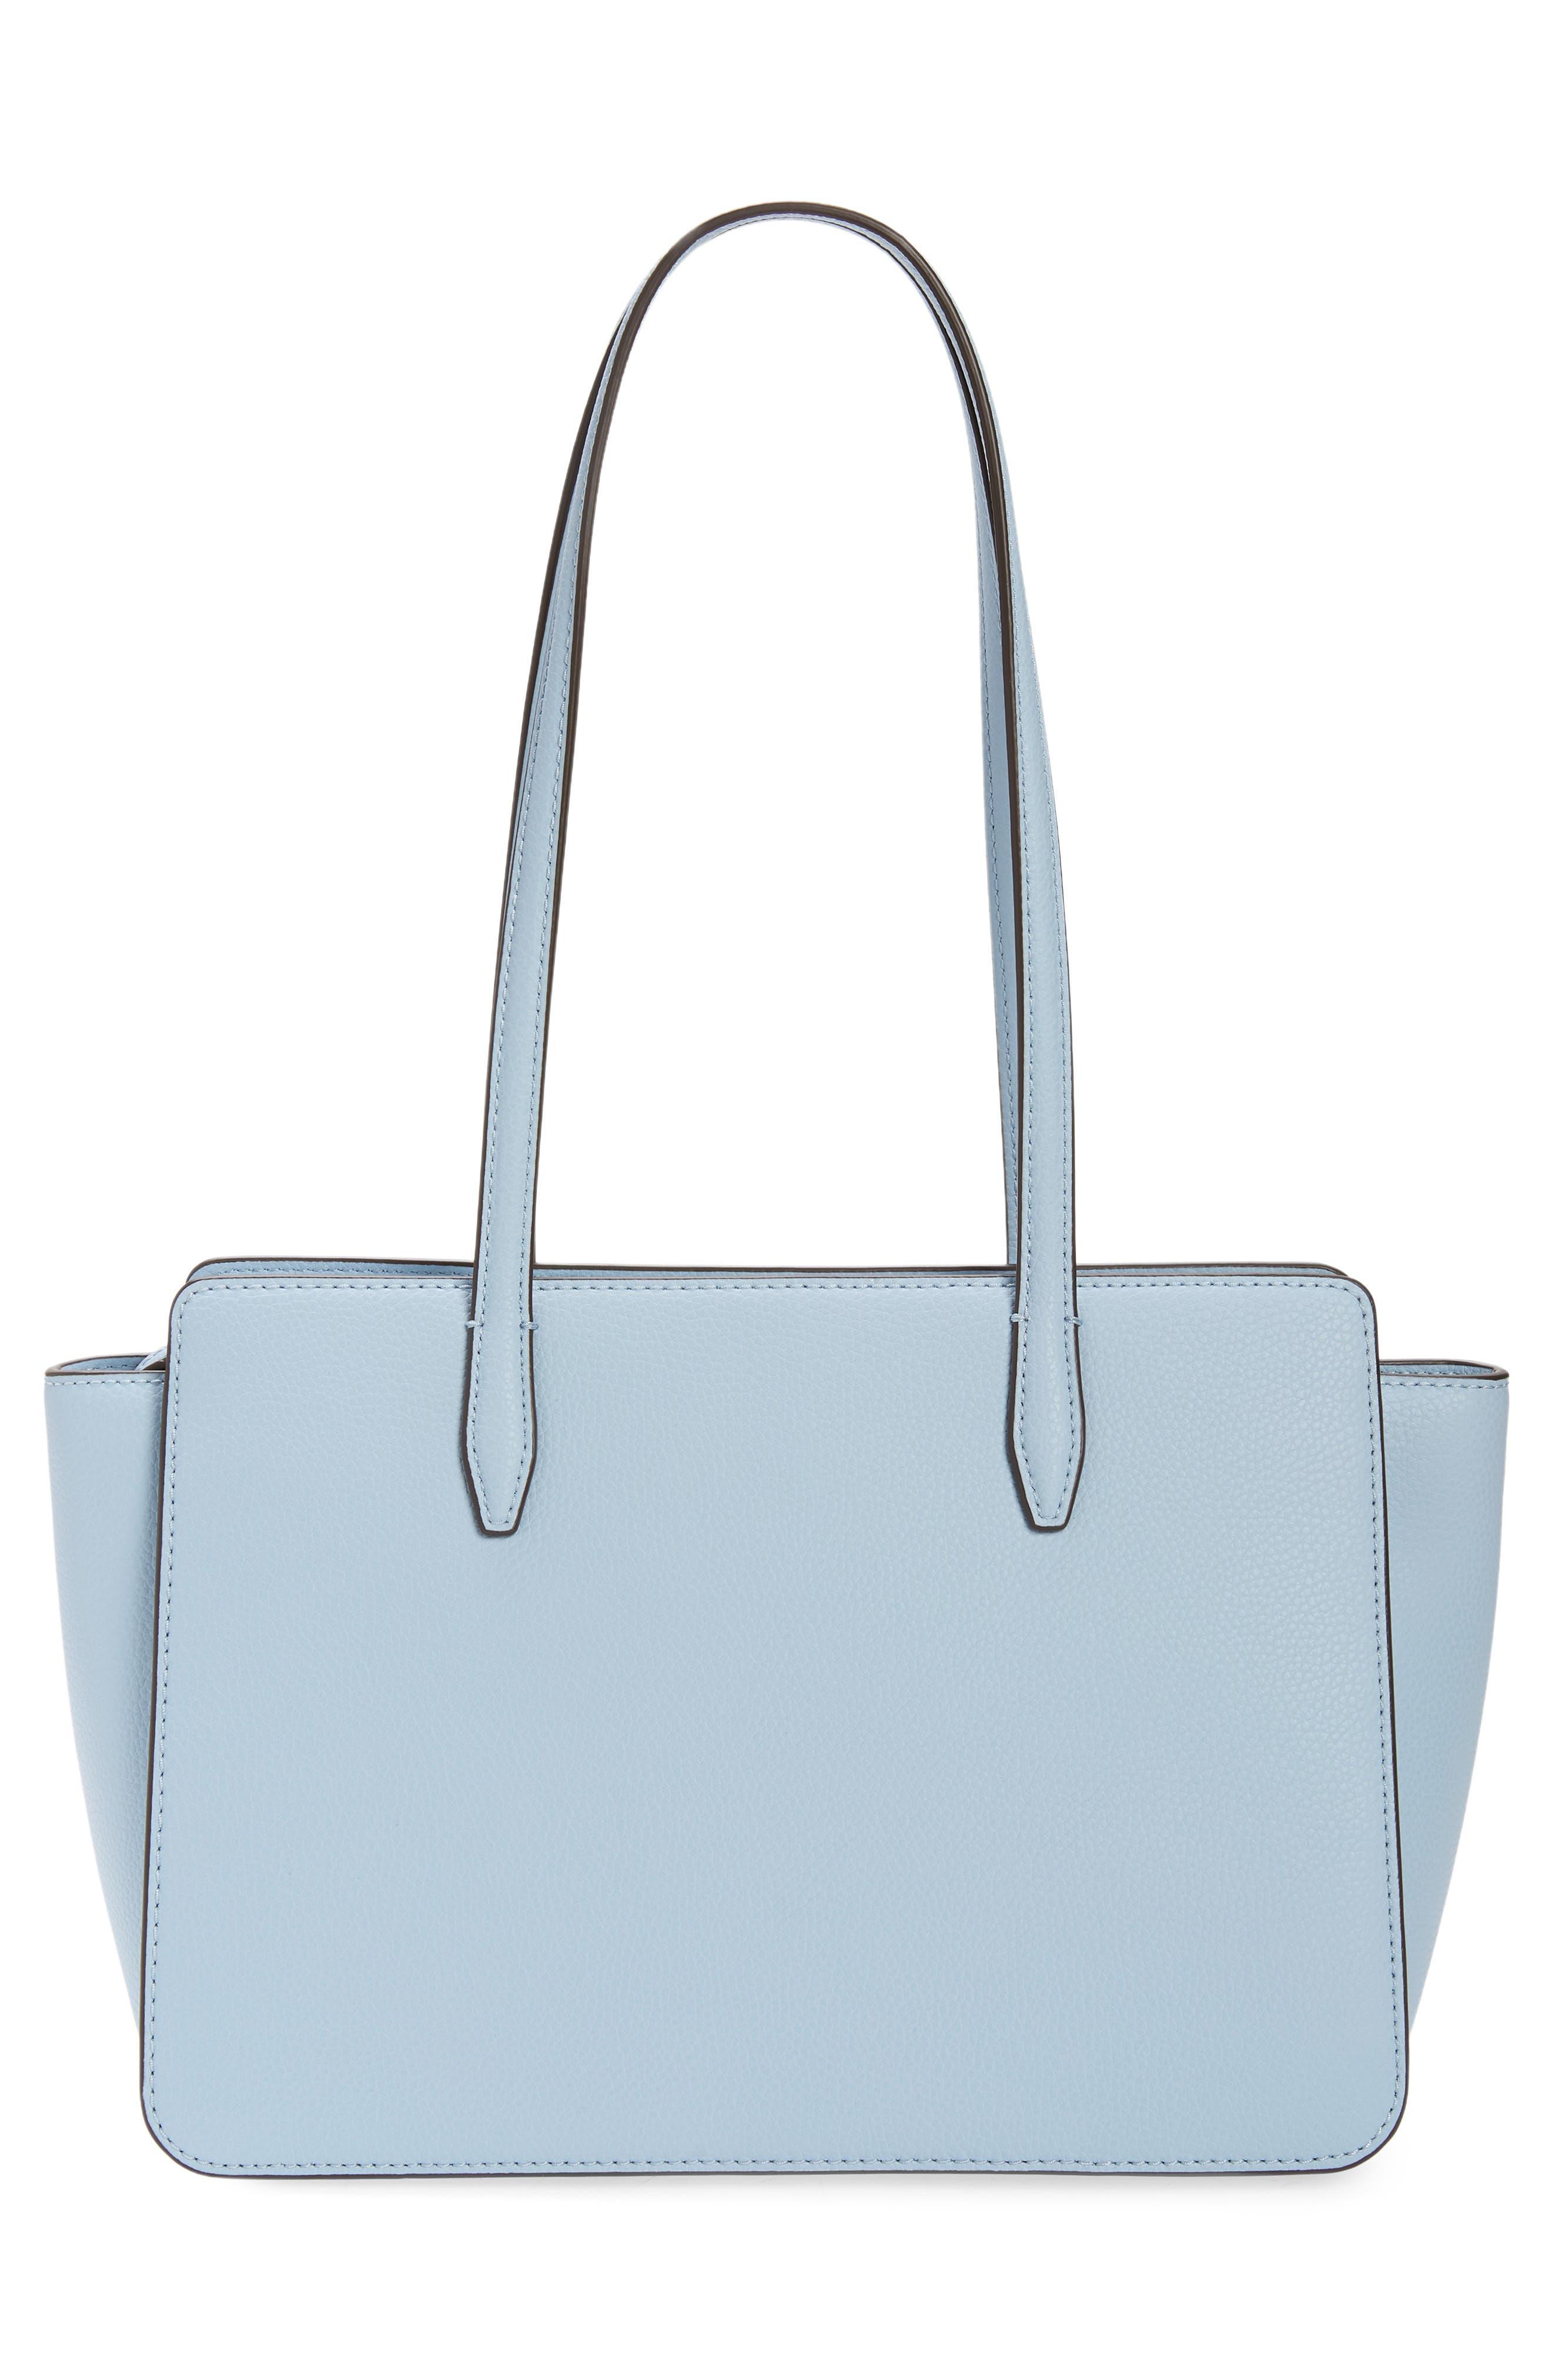 Tory Burch Robinson Small Leather Tote in Blue | Lyst